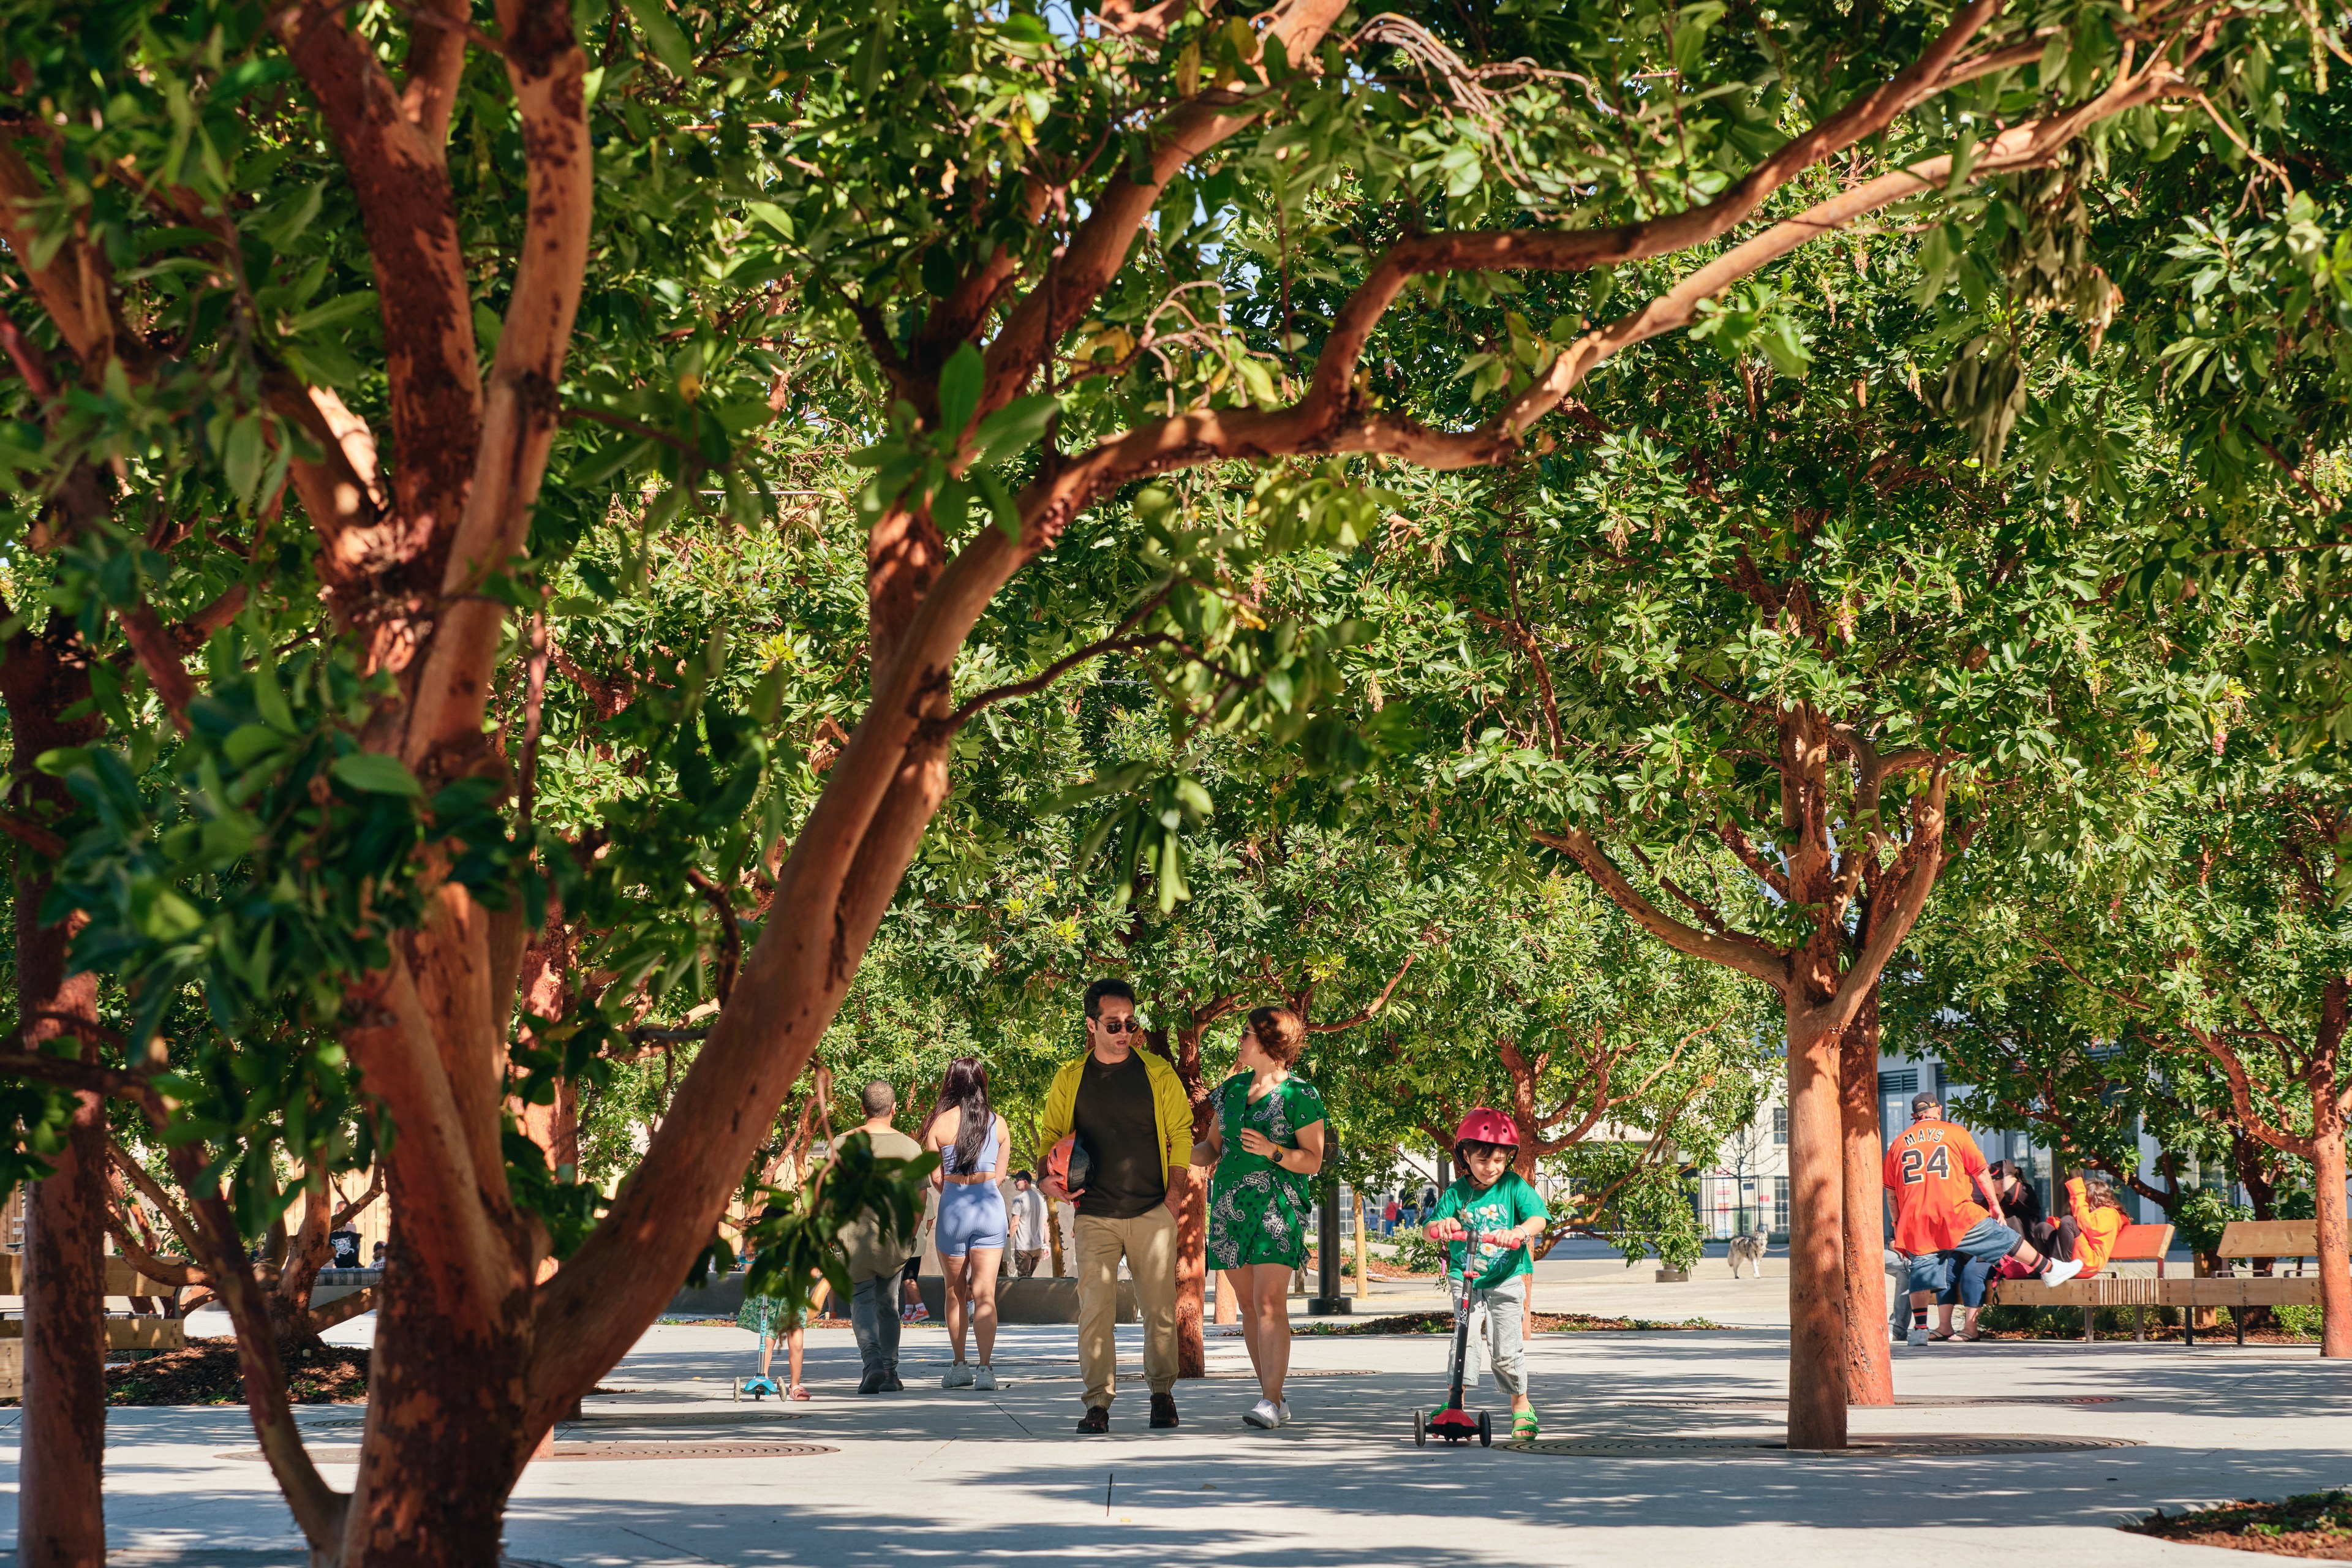 People walk and play under sunlit trees in a lively park.